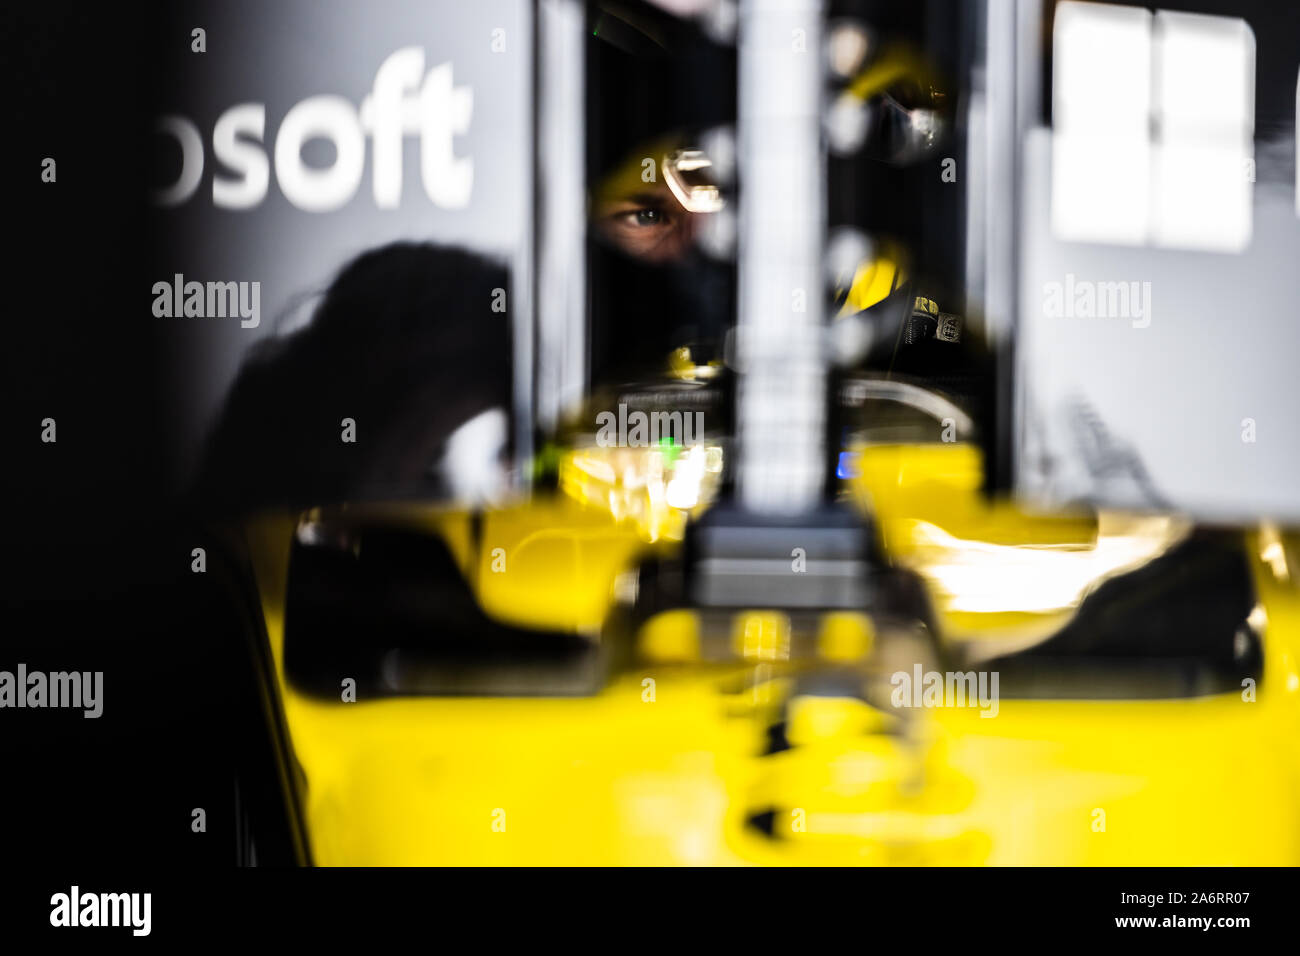 Italy/Monza - 07/09/2019 - #27 Nico Hulkenberg (GER, Renault Sport F1 Team, R.S. 19) waiting to go out during FP3 ahead of Qualifying for the Italian Stock Photo